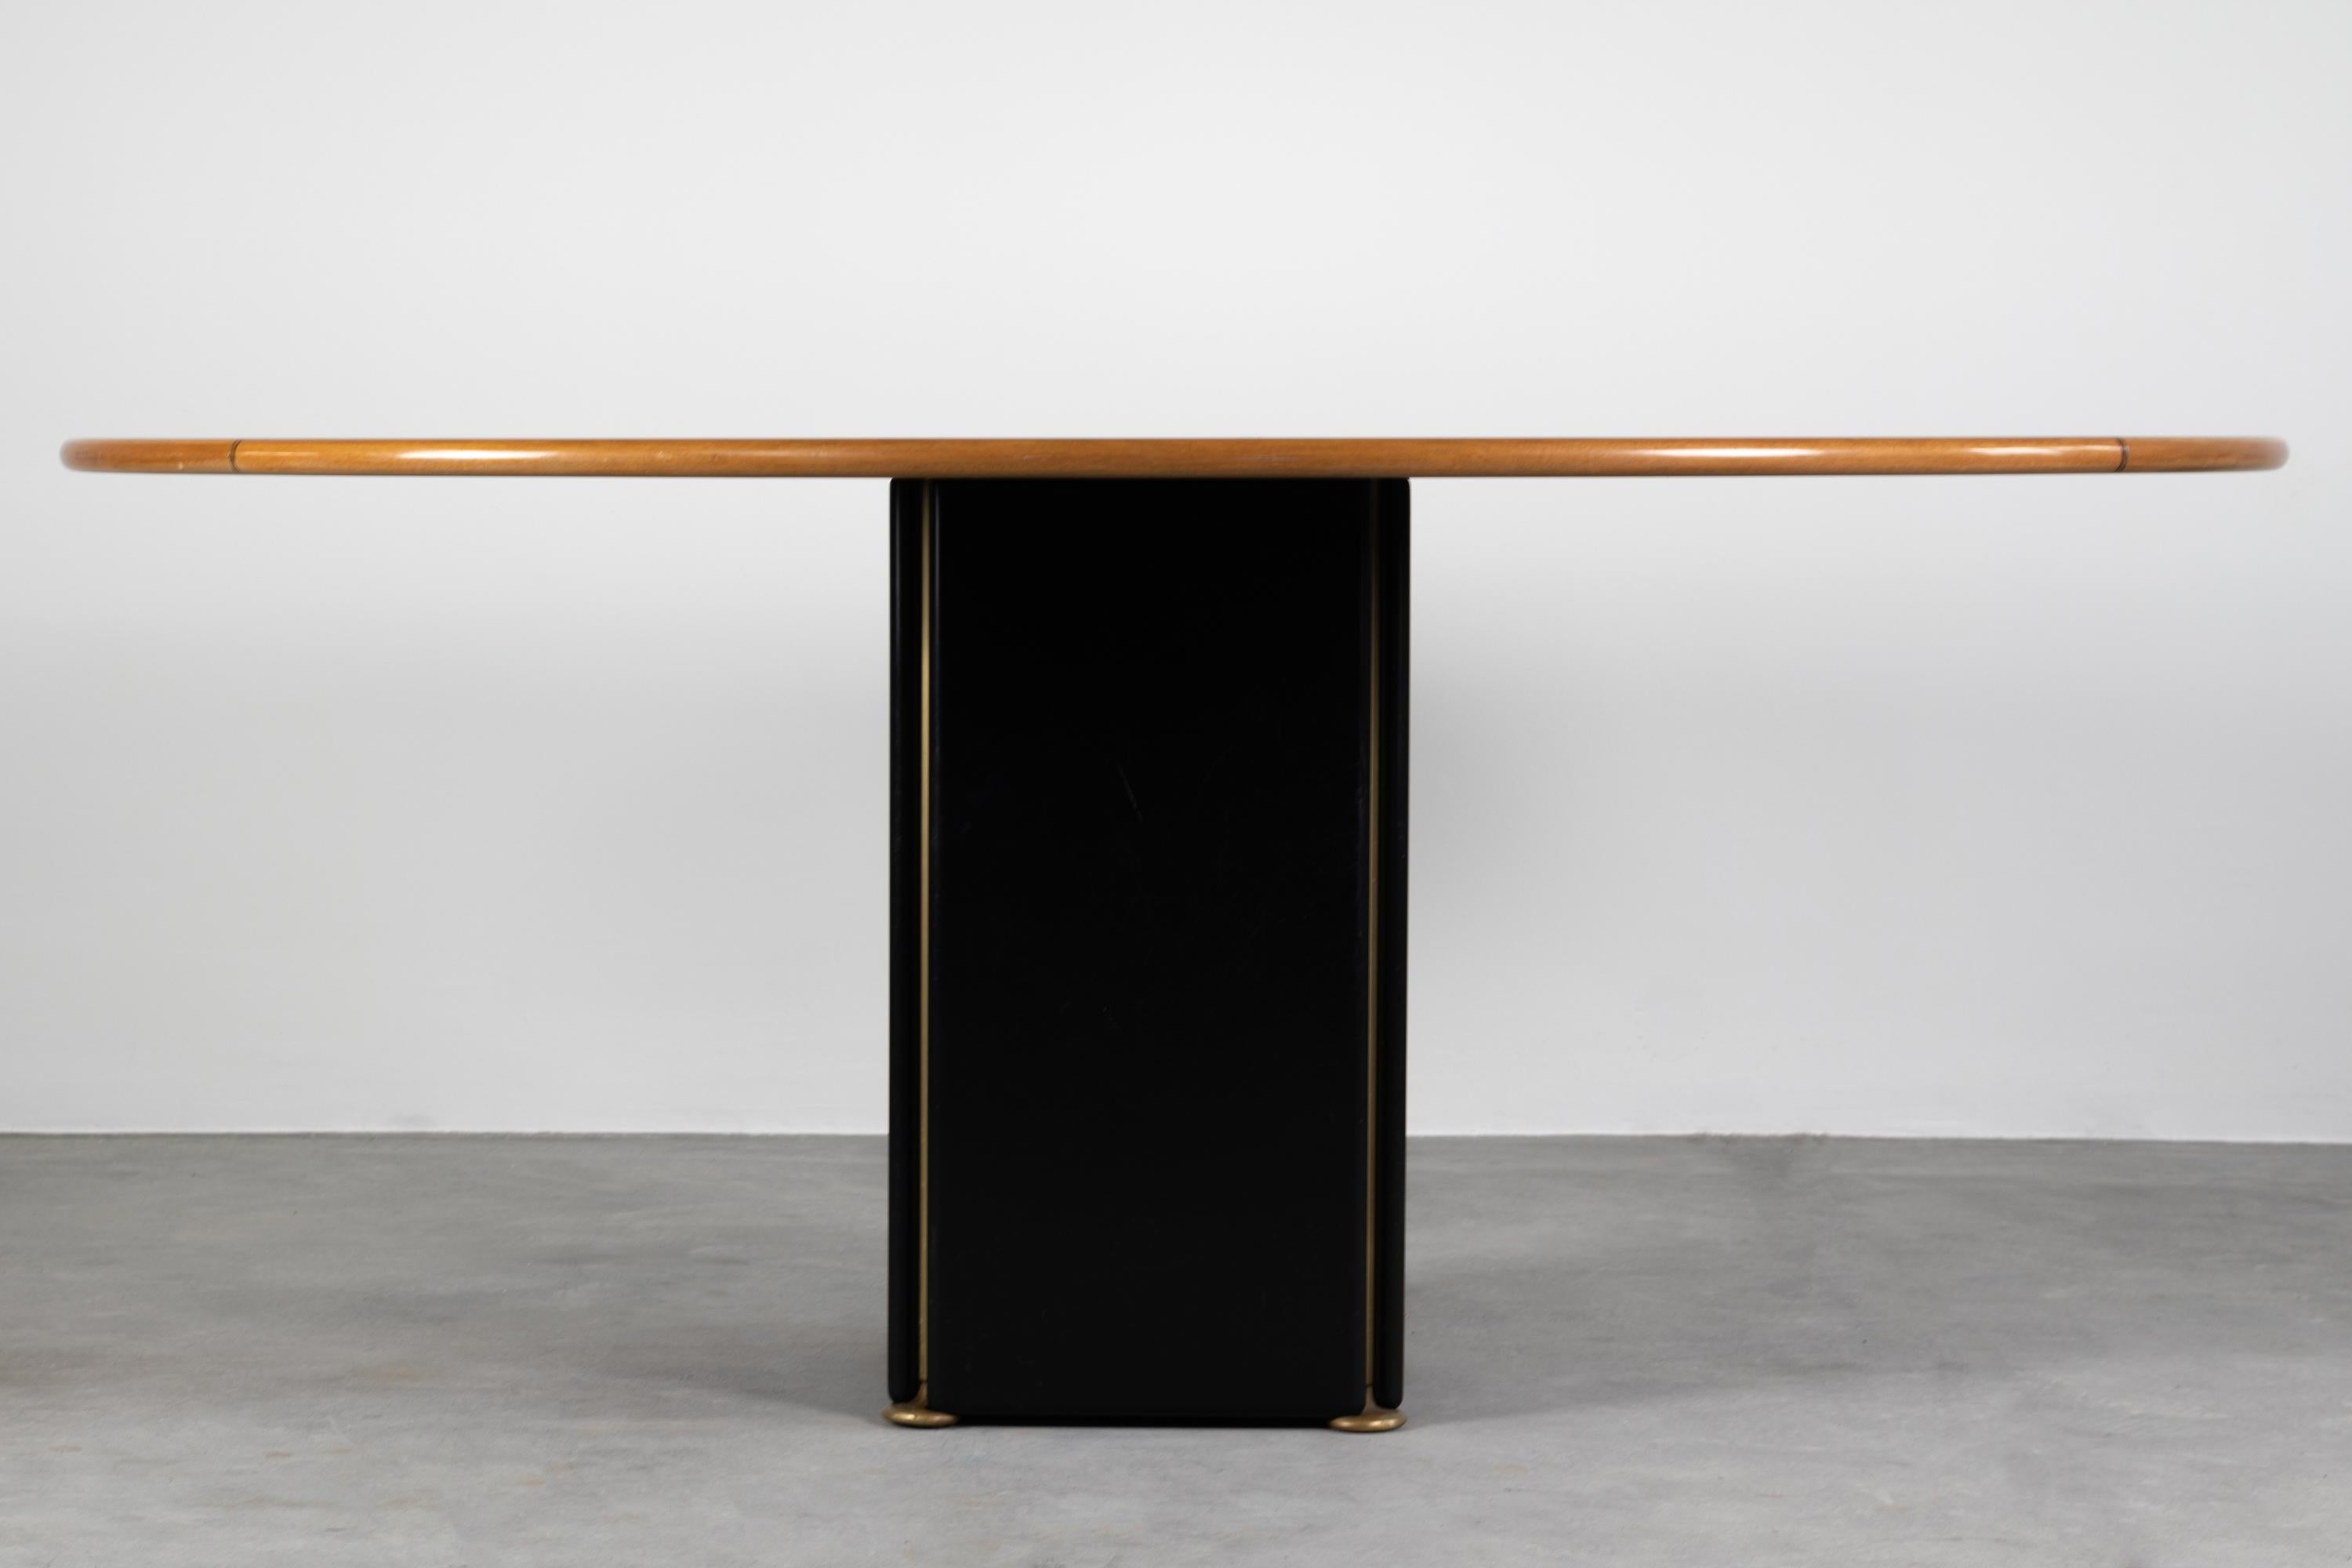 Oval-shape table from Artona series in wood with brass details, designed by Tobia and Afra Scarpa produced by Maxalto, 1970s.

Tobia Scarpa and his wife Afra Bianchin began their long career together in 1959, designing the Pigreco chair at Franco